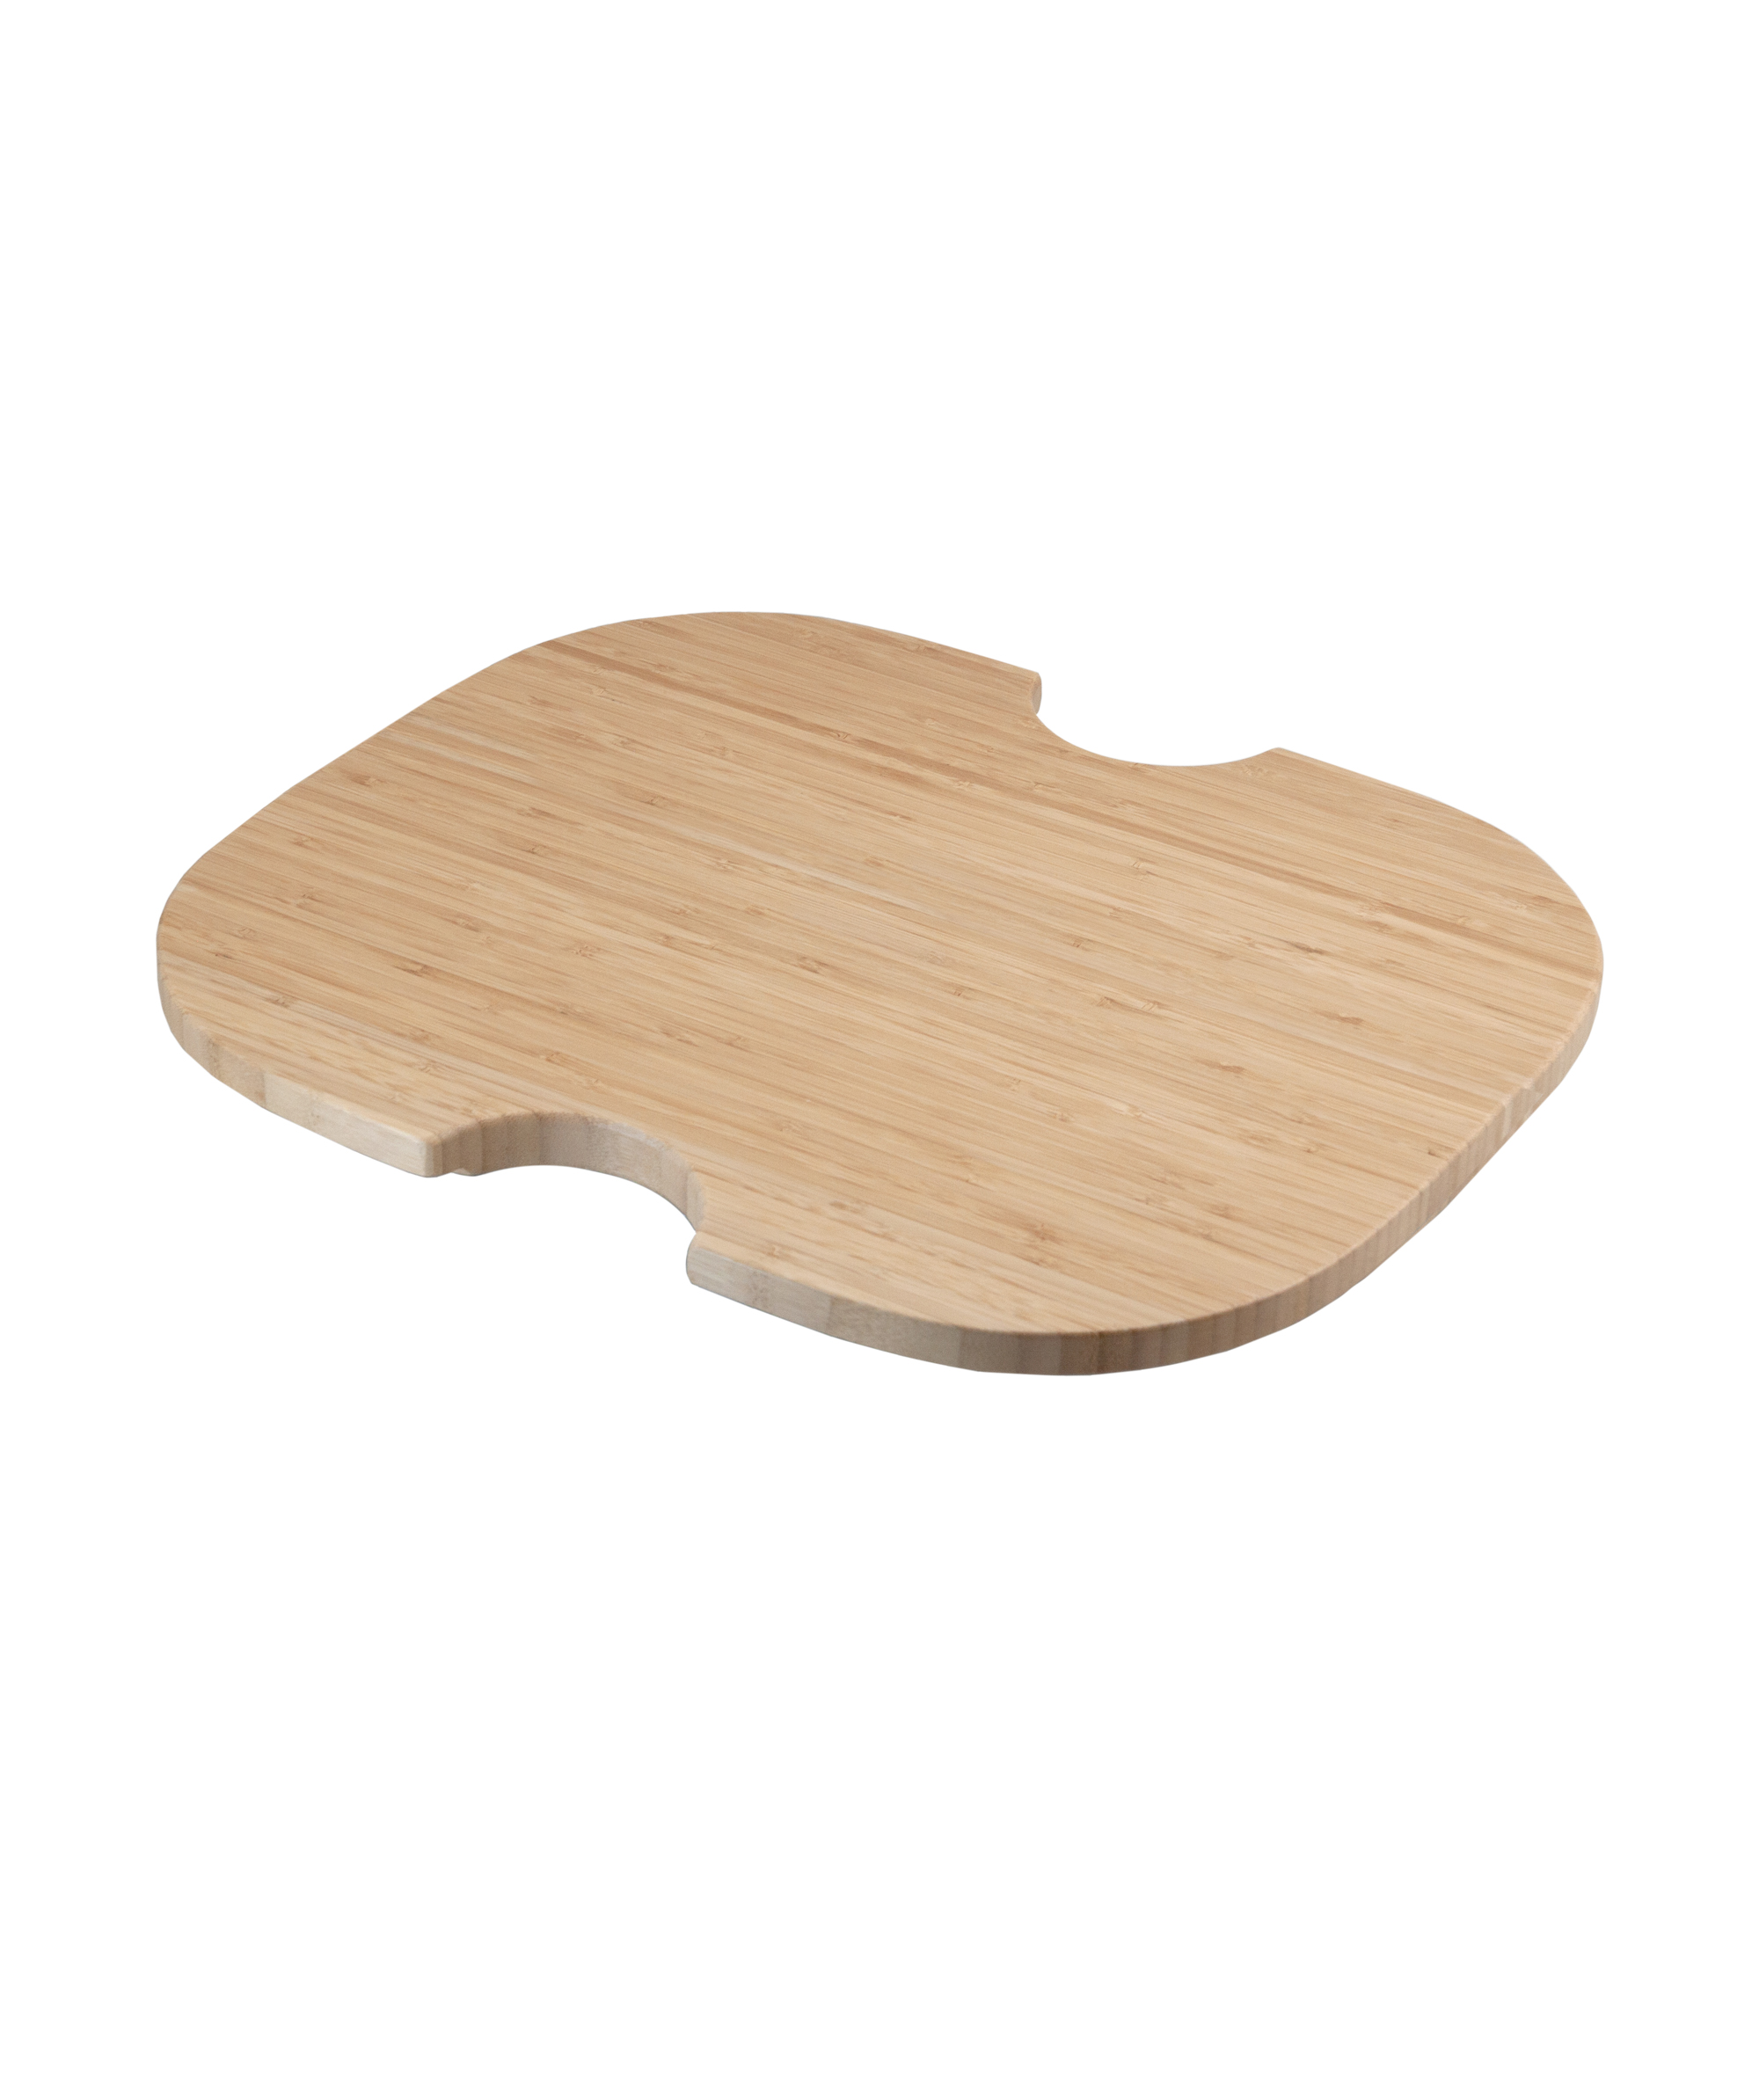 Cutting Board 05 - for Acero 345 stainless steel sink